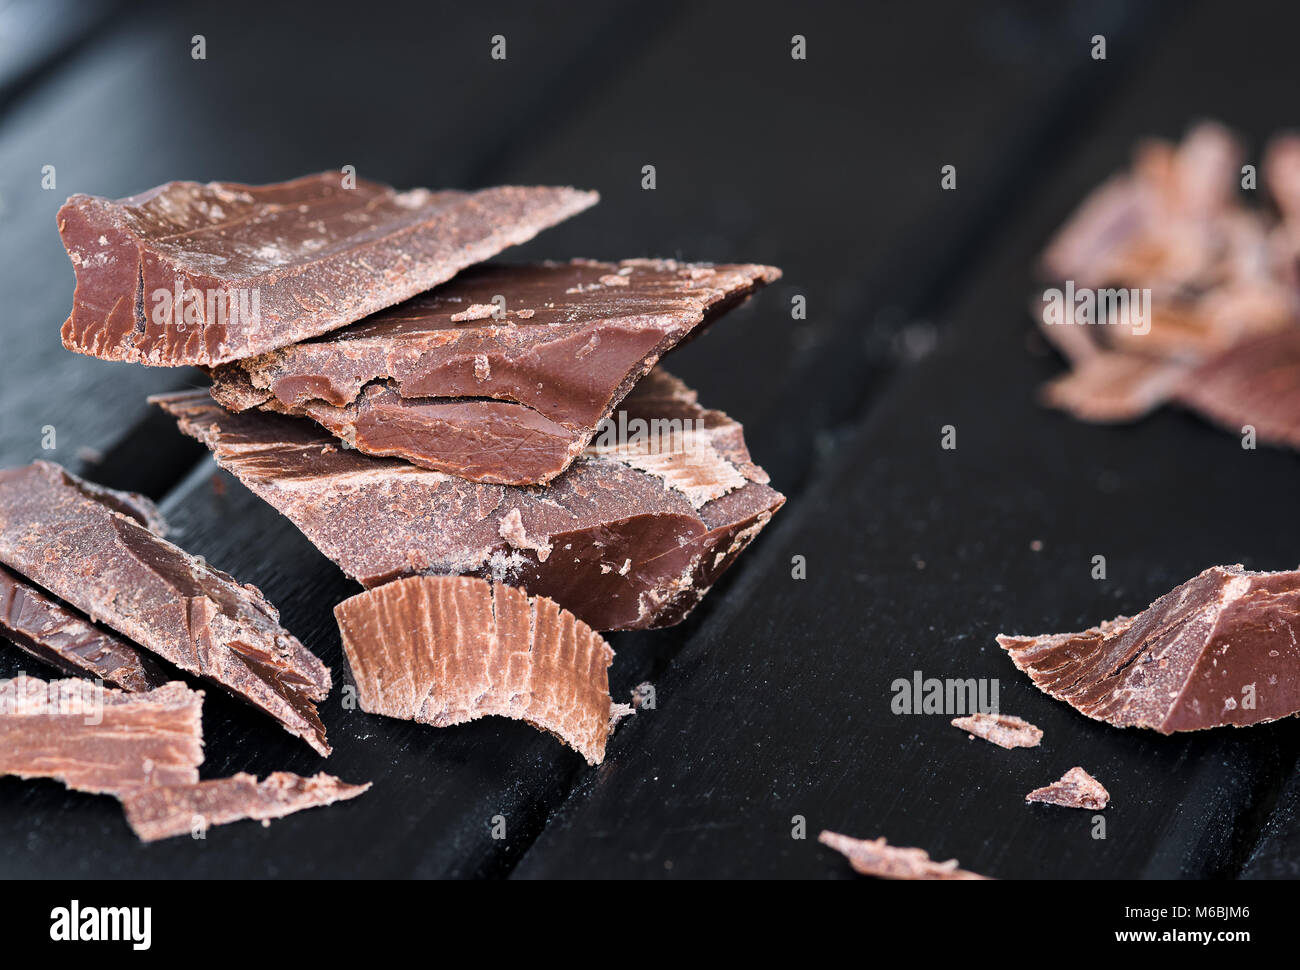 Delicious Chocolate pieces on a dark wooden moody background, closeup macro, with lots of texture Stock Photo